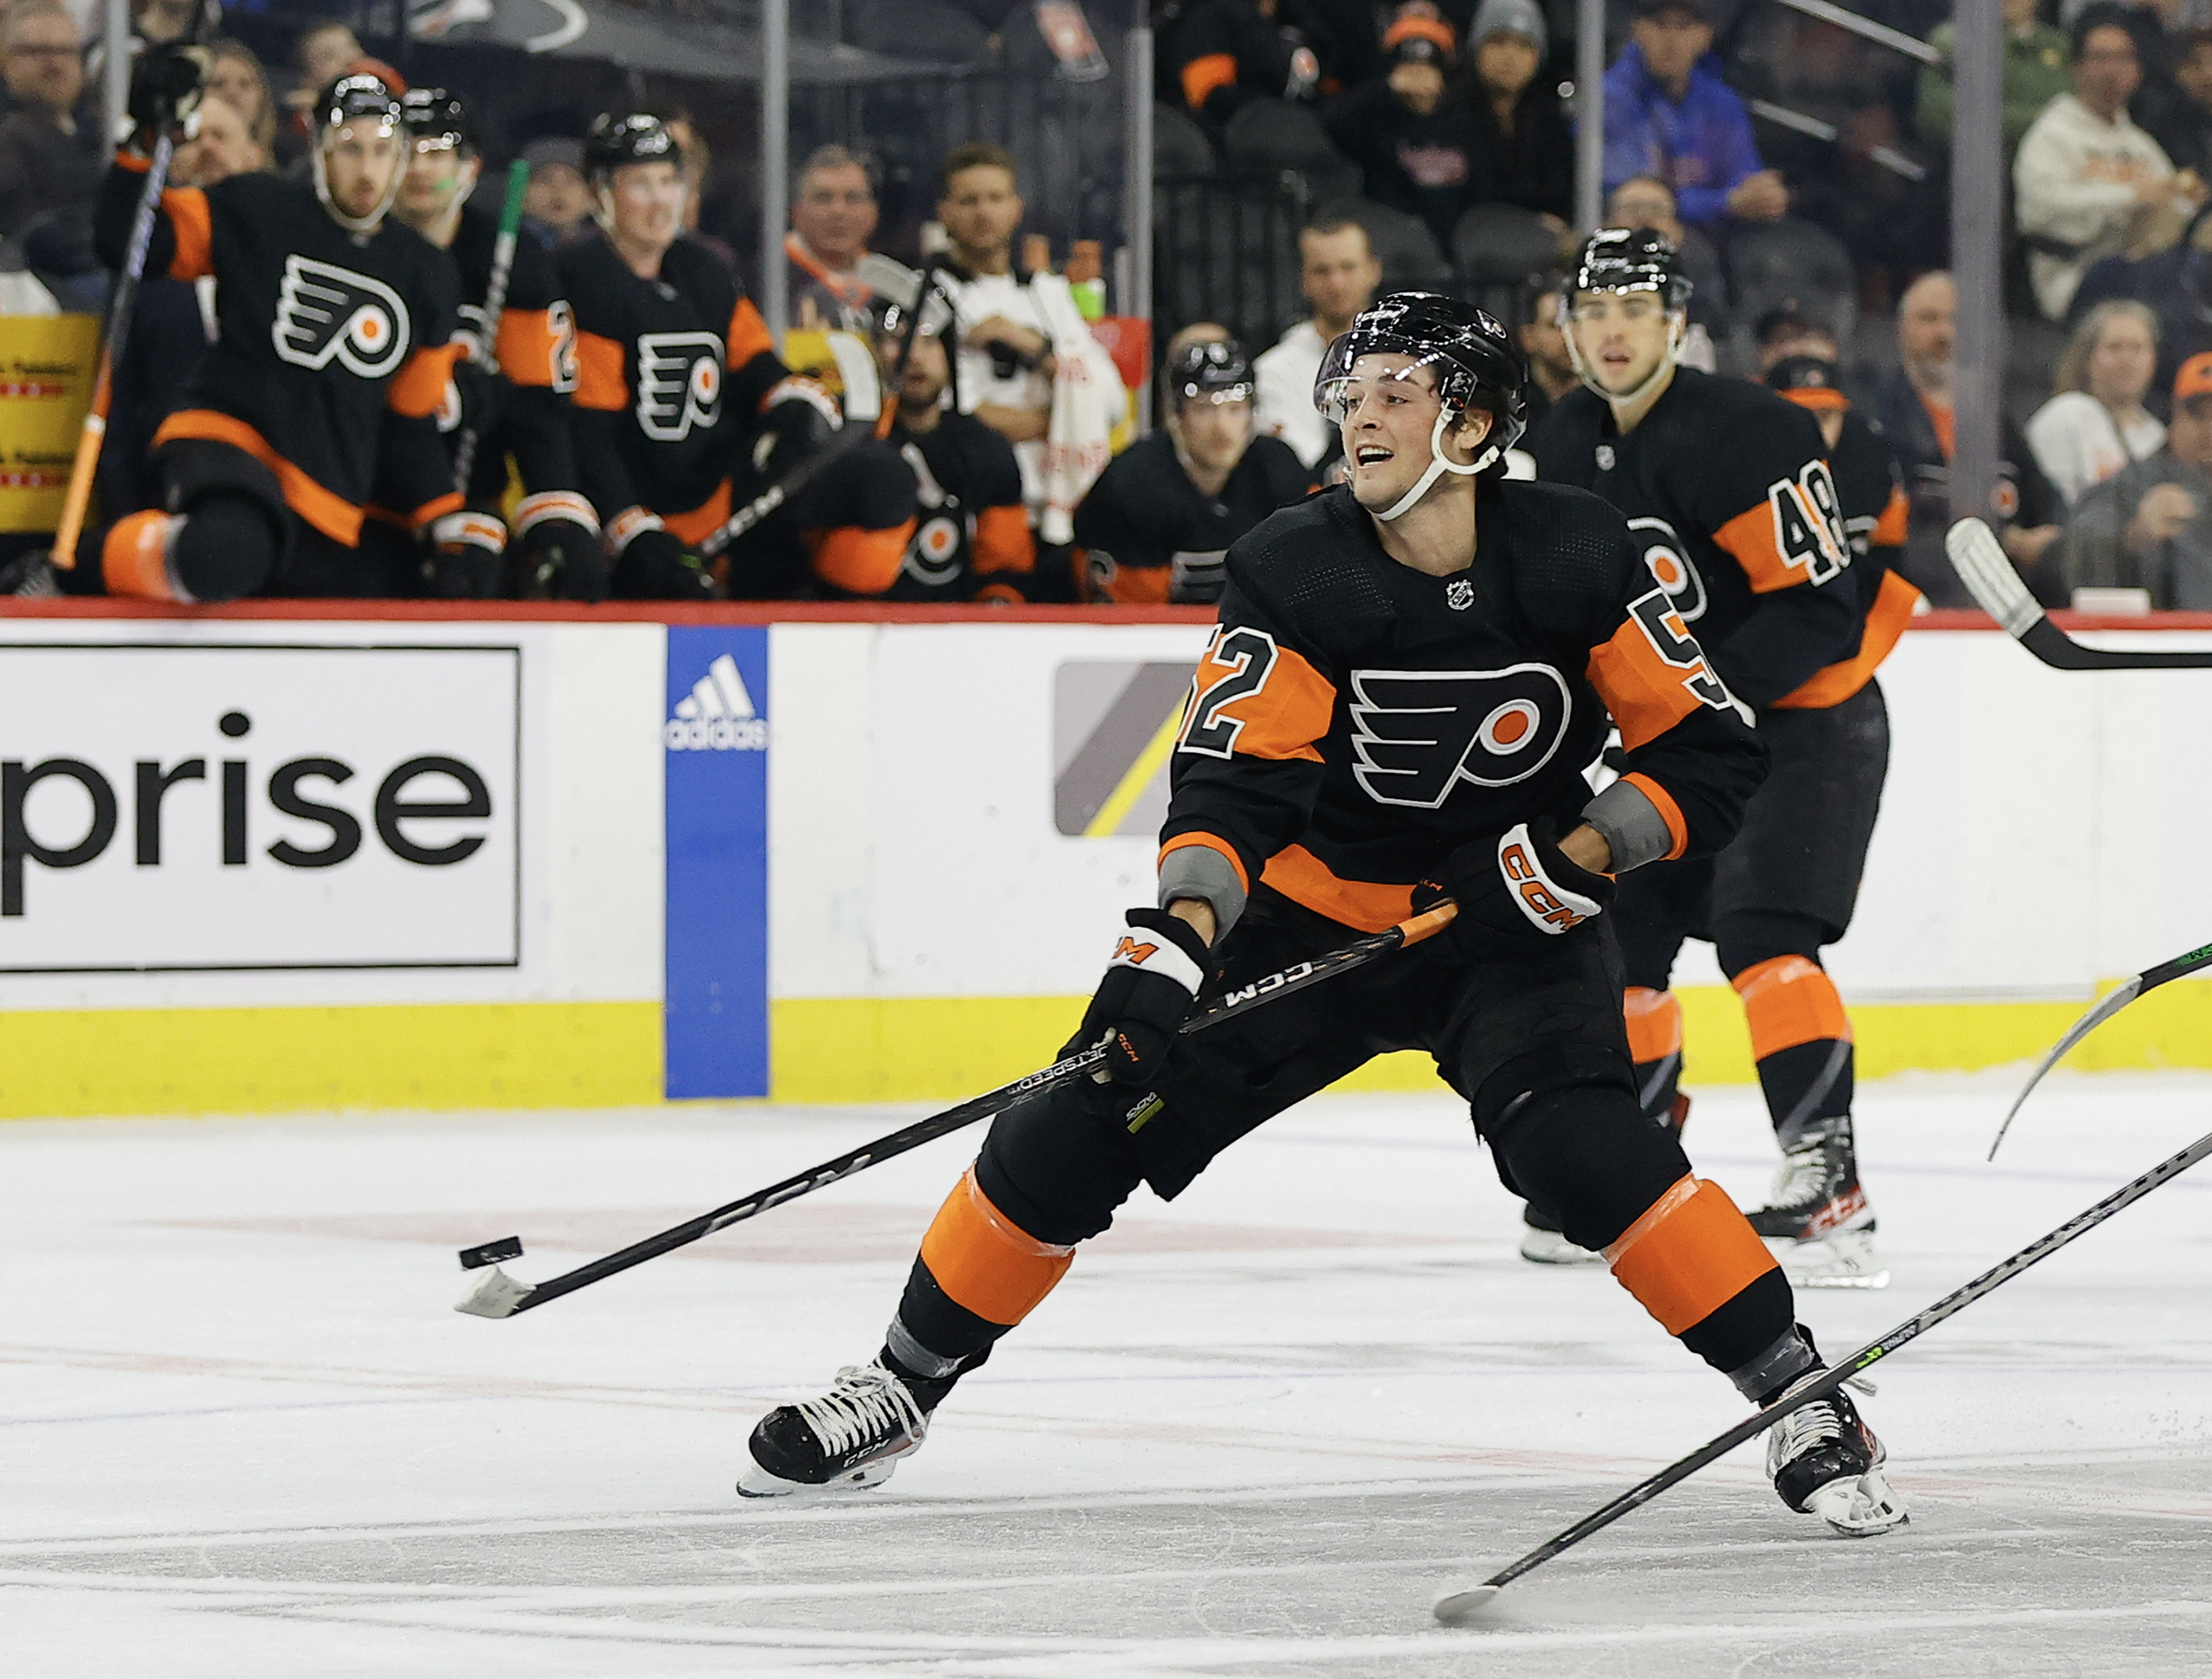 Foerster, Brink, Andrae headline young players to watch on Flyers